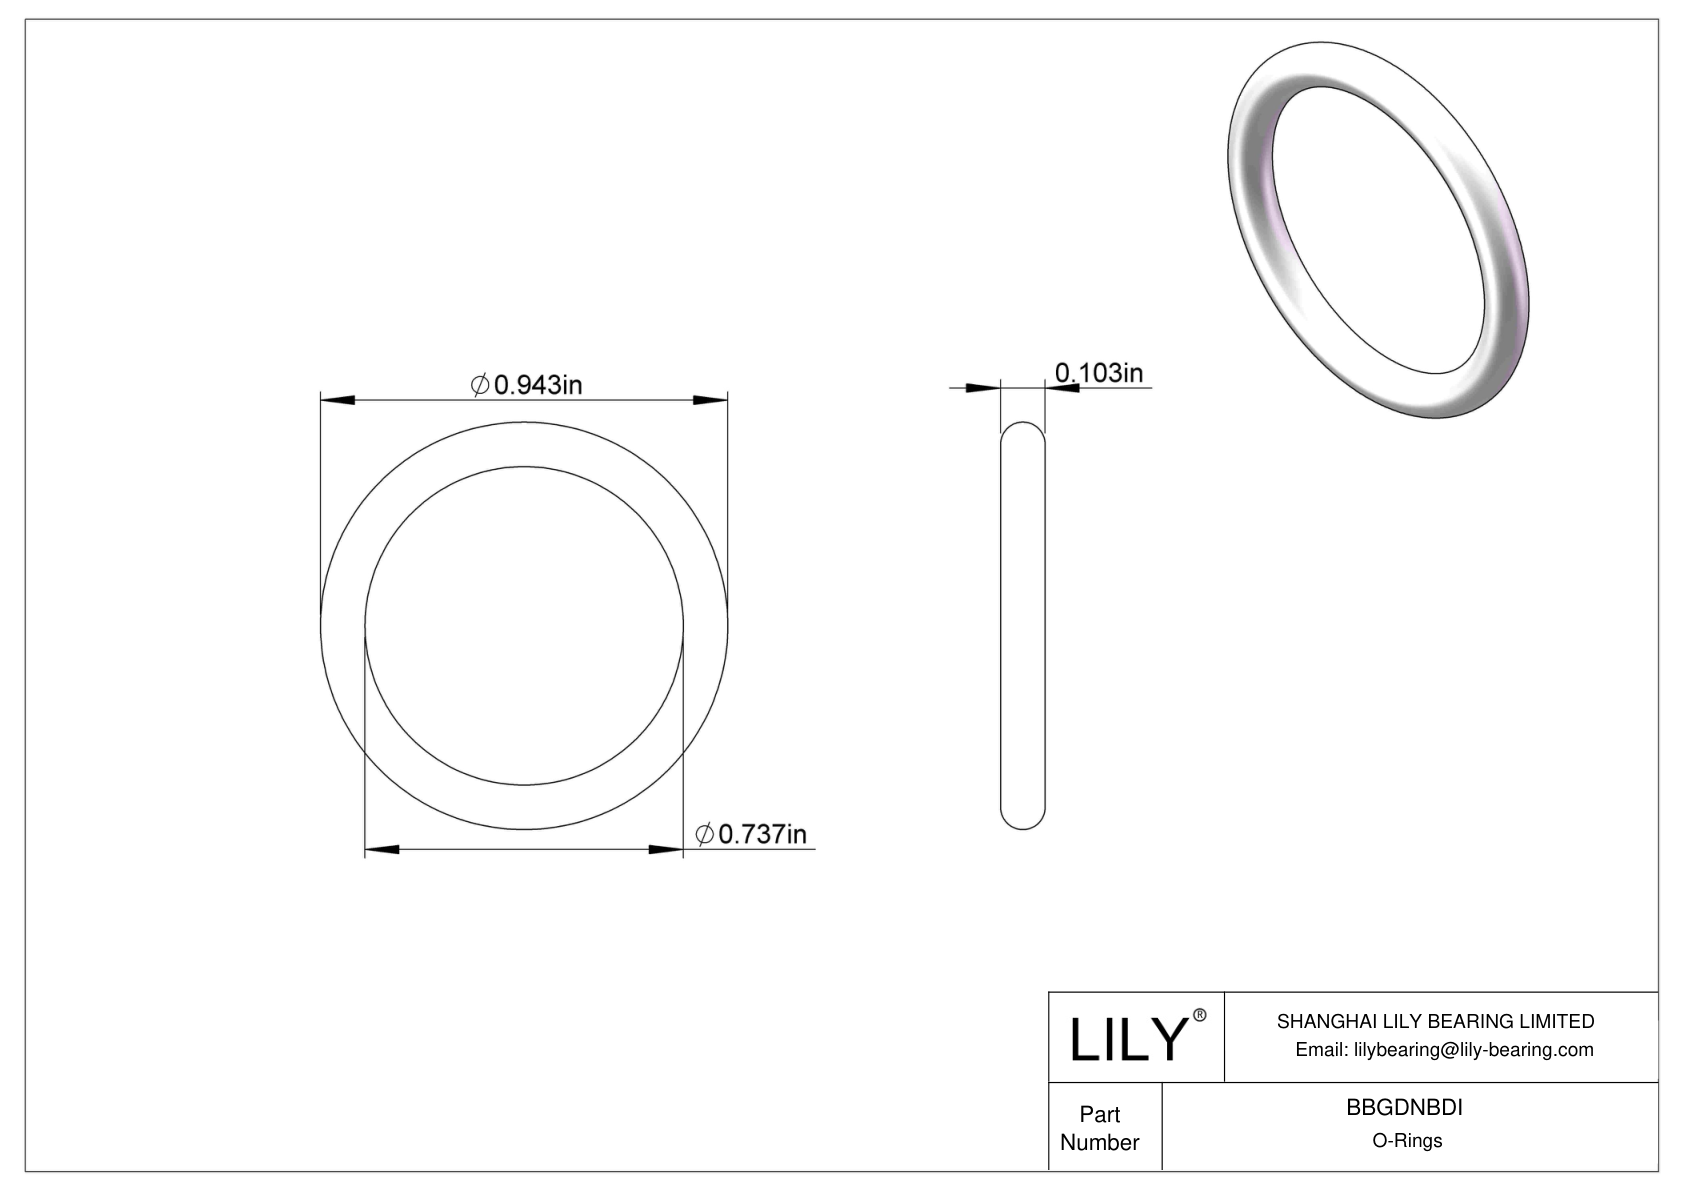 BBGDNBDI Chemical Resistant O-rings Round cad drawing